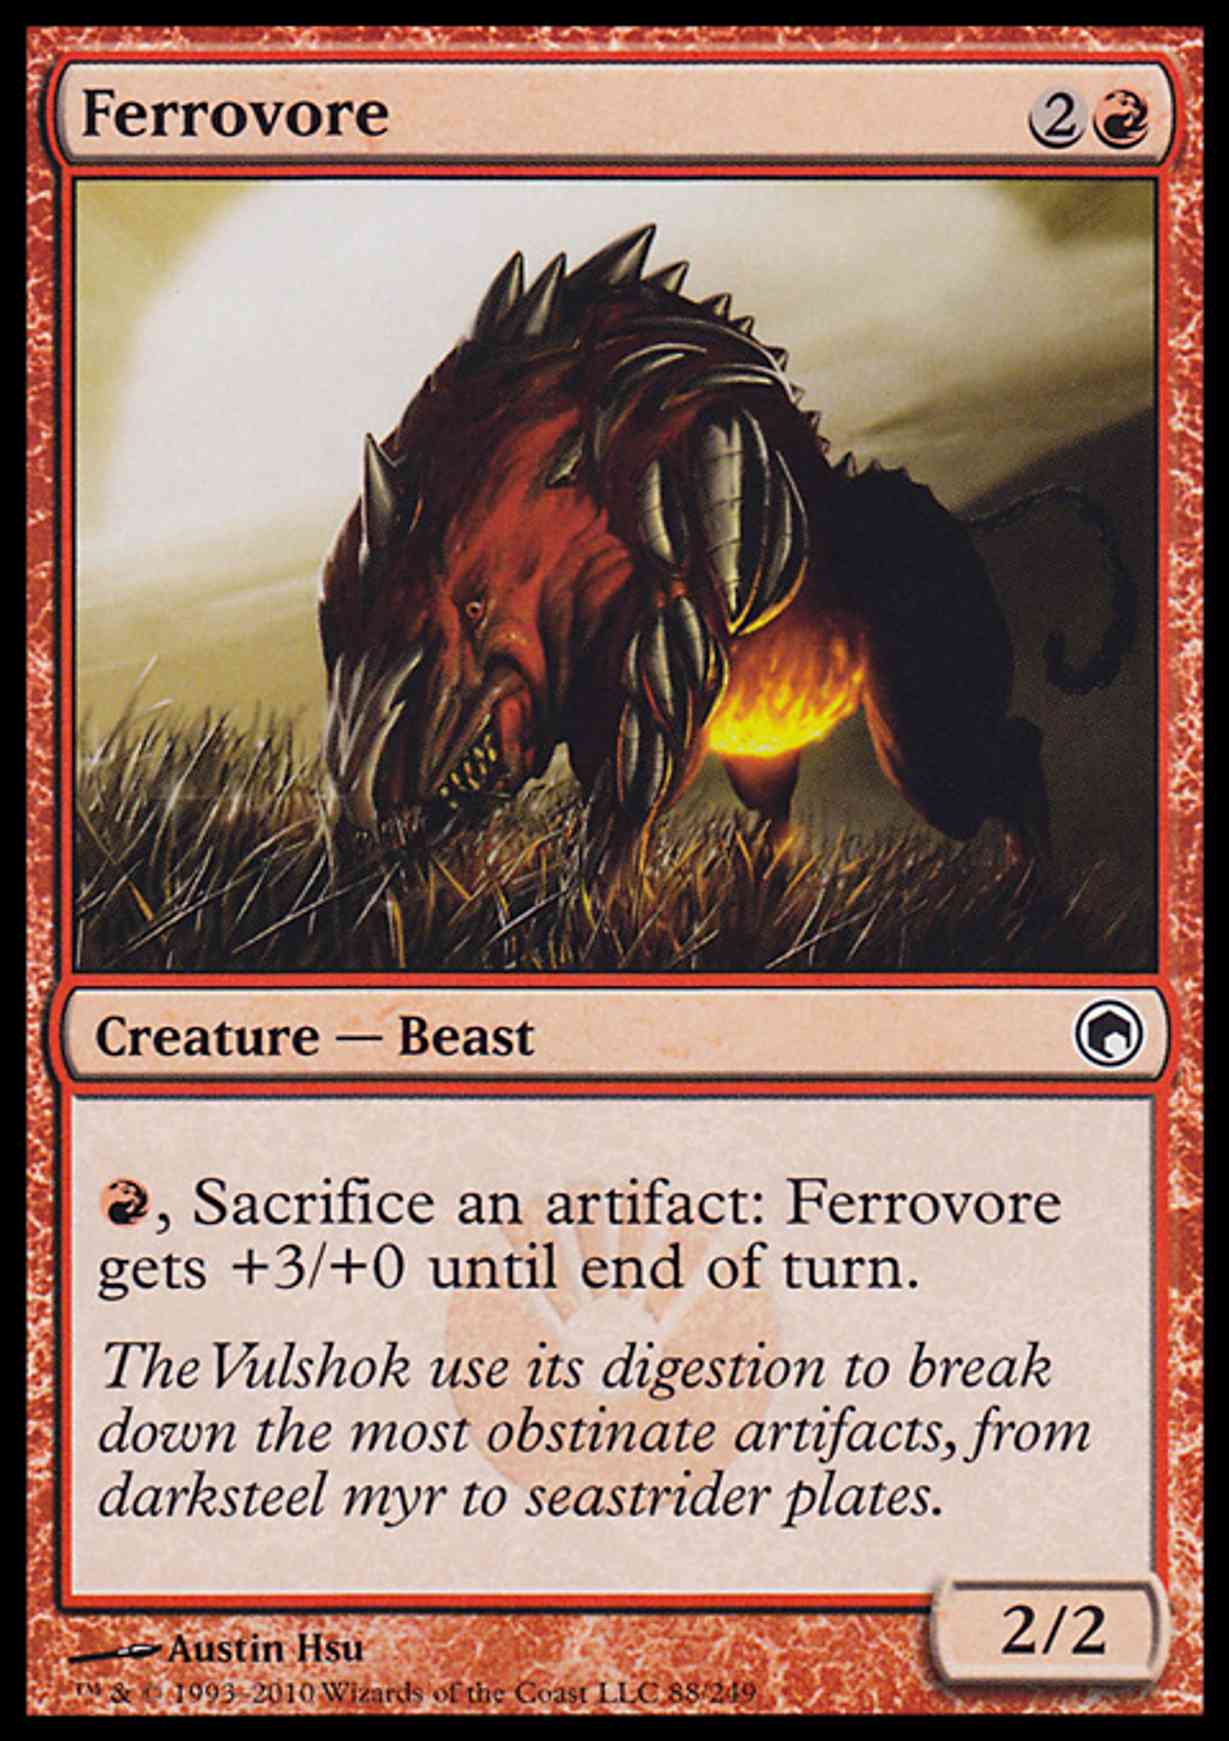 Ferrovore magic card front